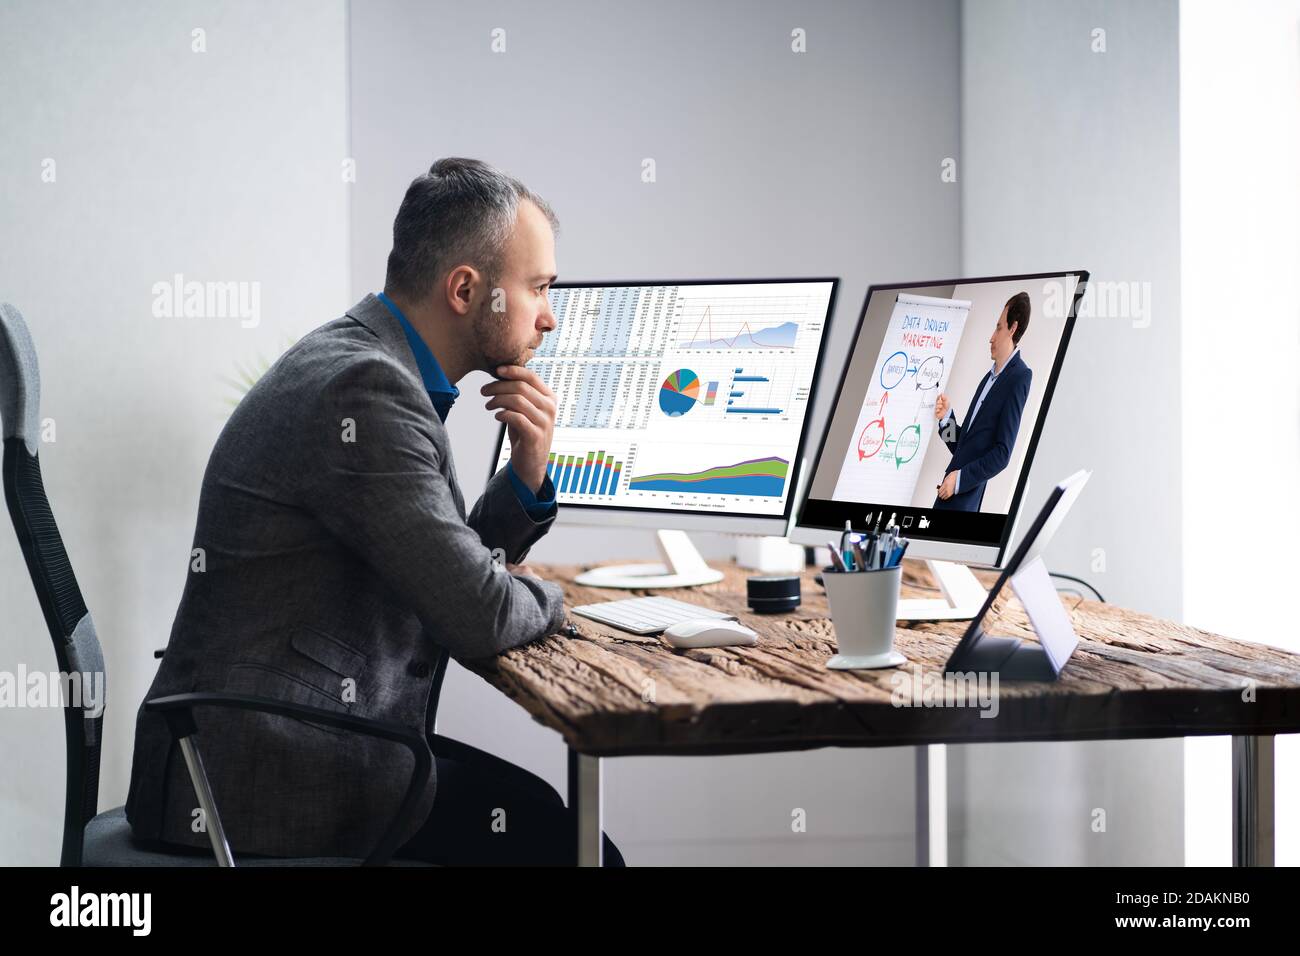 Online Virtual Lecture Webinar Or Training Tutorial Stock Photo